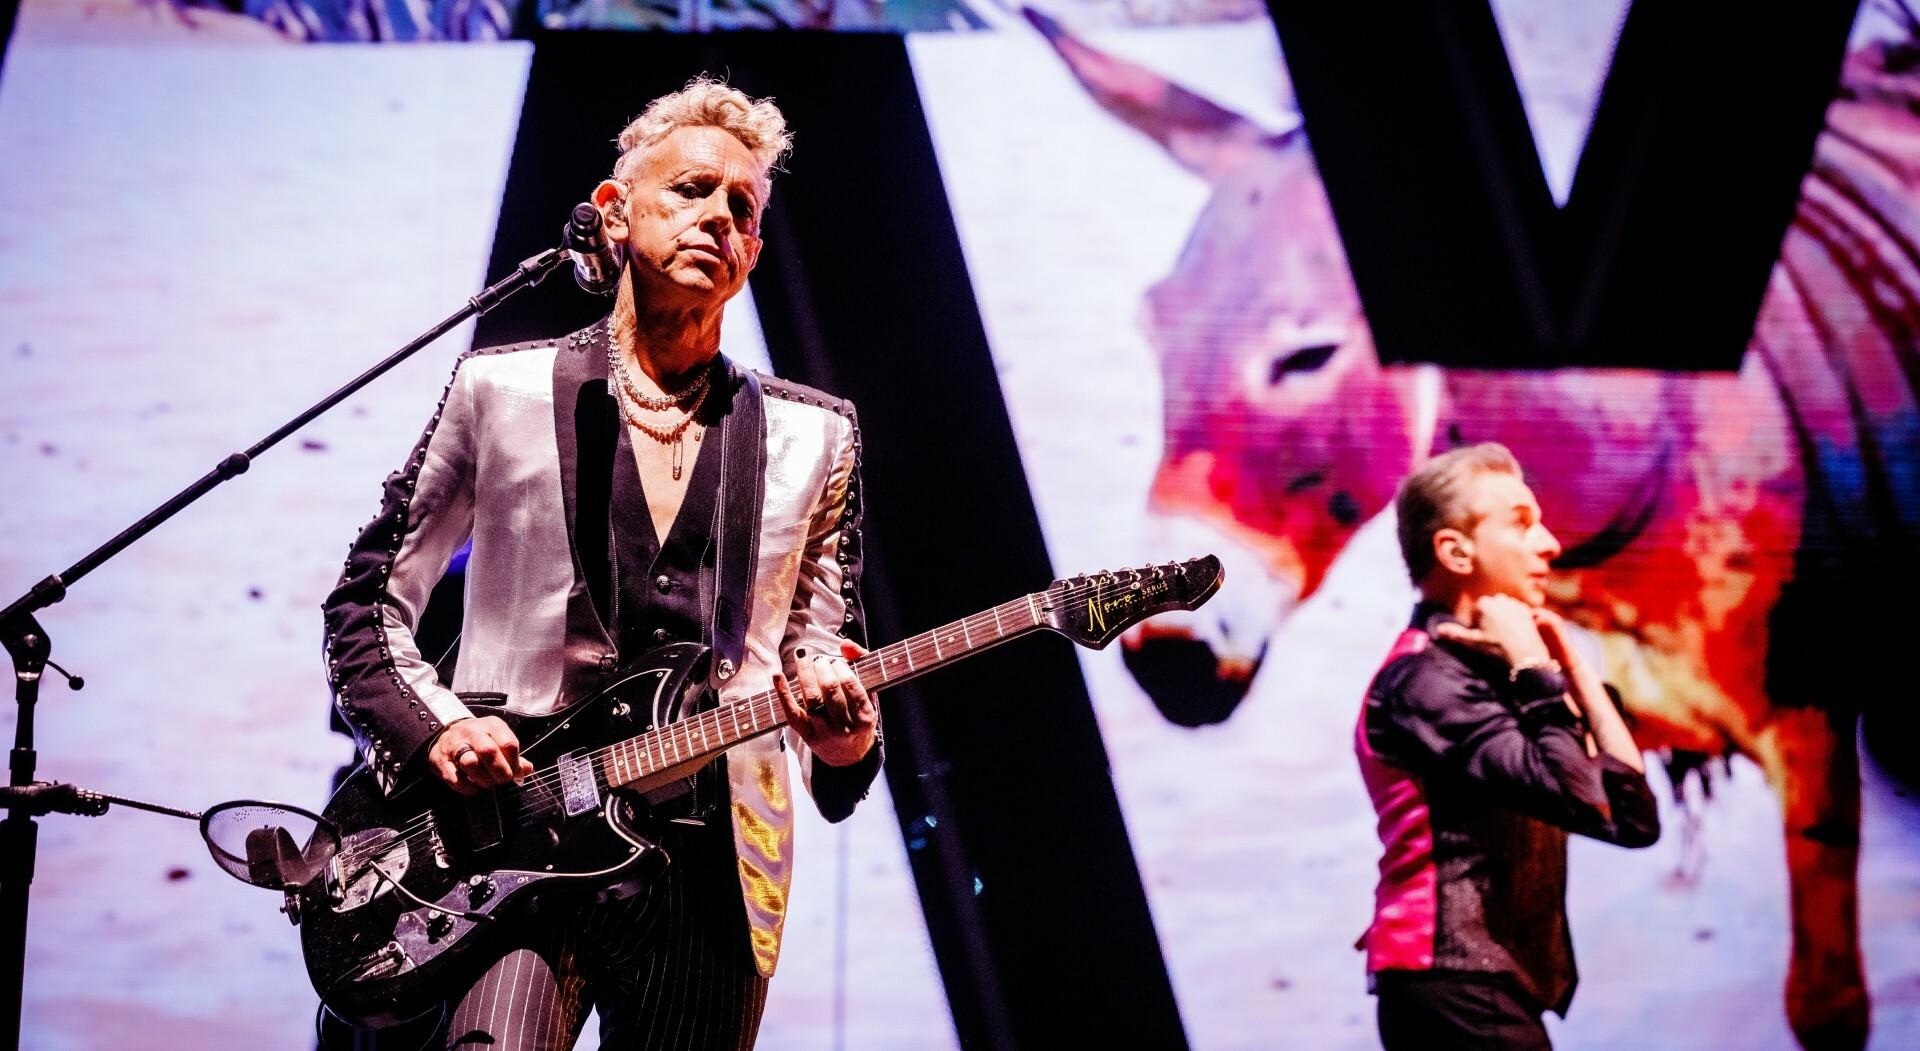 depeche-mode-at-london’s-o2-arena:-everything-you-need-to-know